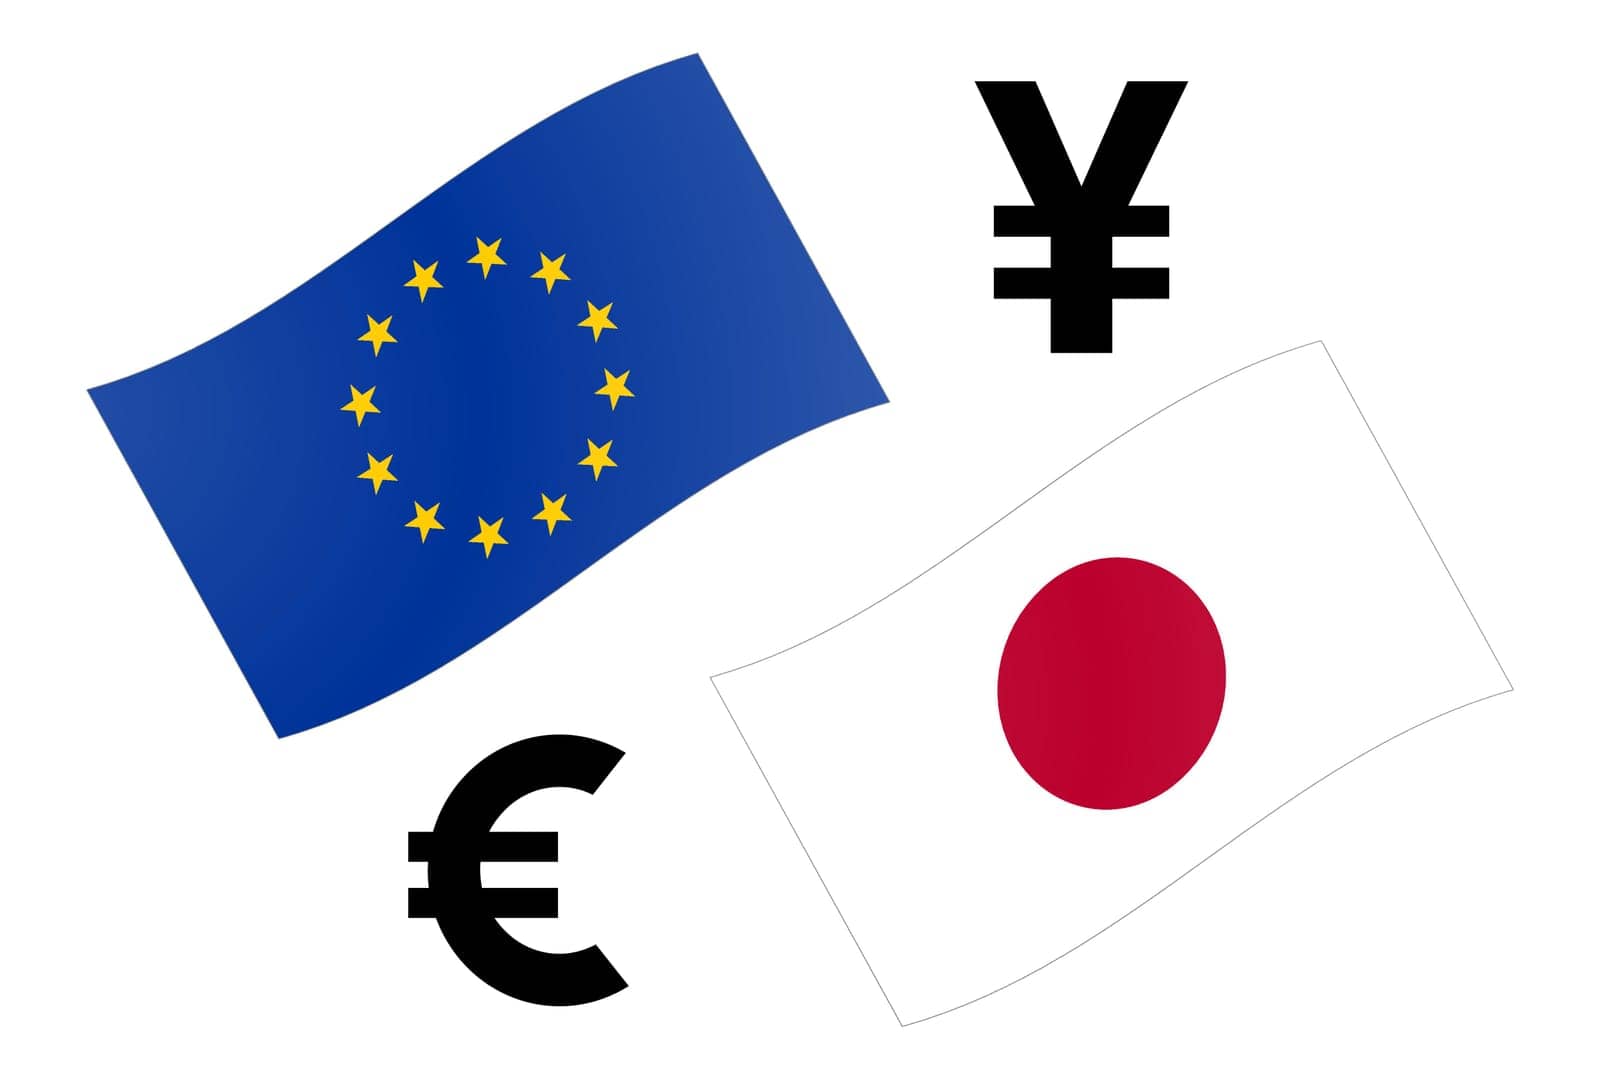 EURJPY forex currency pair vector illustration. EU and Japanese flag, with Euro and Yen symbol.